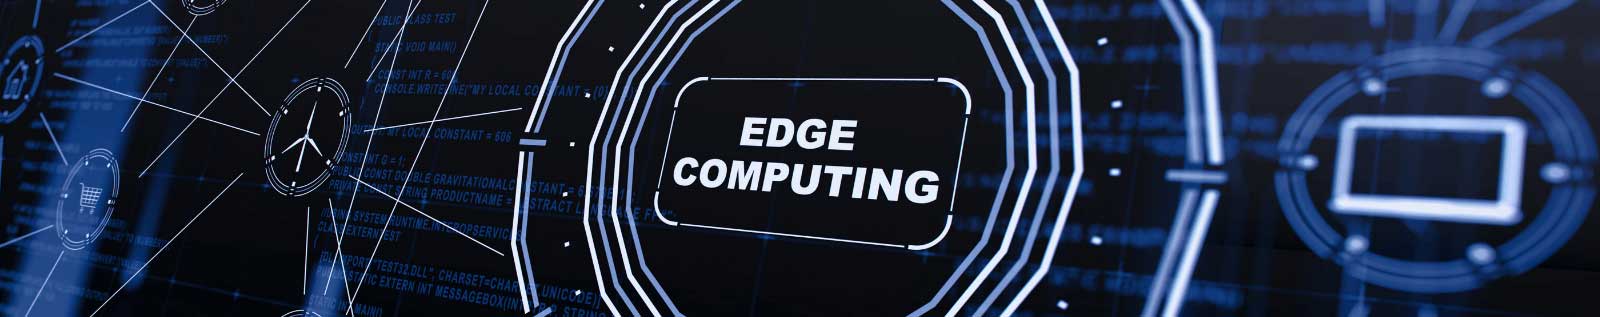 Mobile Edge Computing Current Trends 1